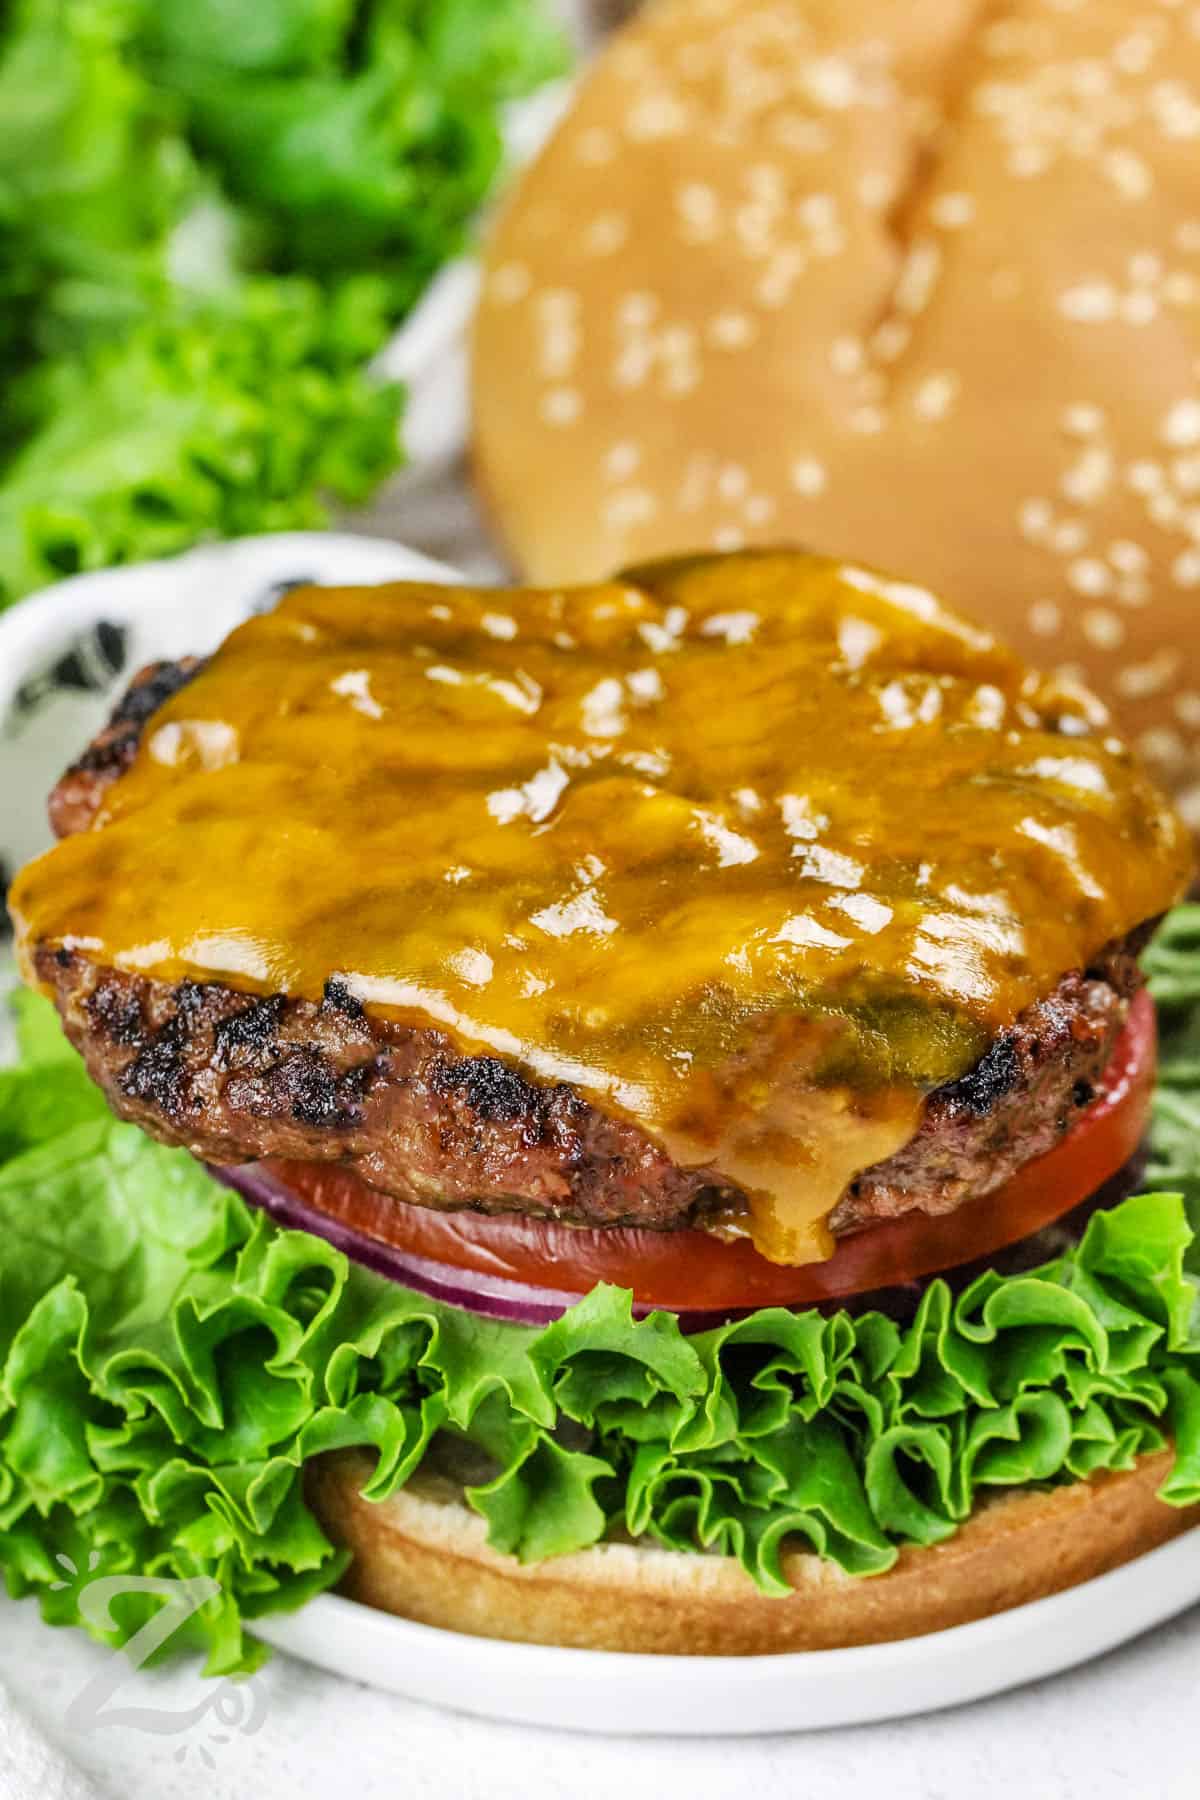 Hamburger Patties with cheese on a bun with lettuce , tomatoe and onion